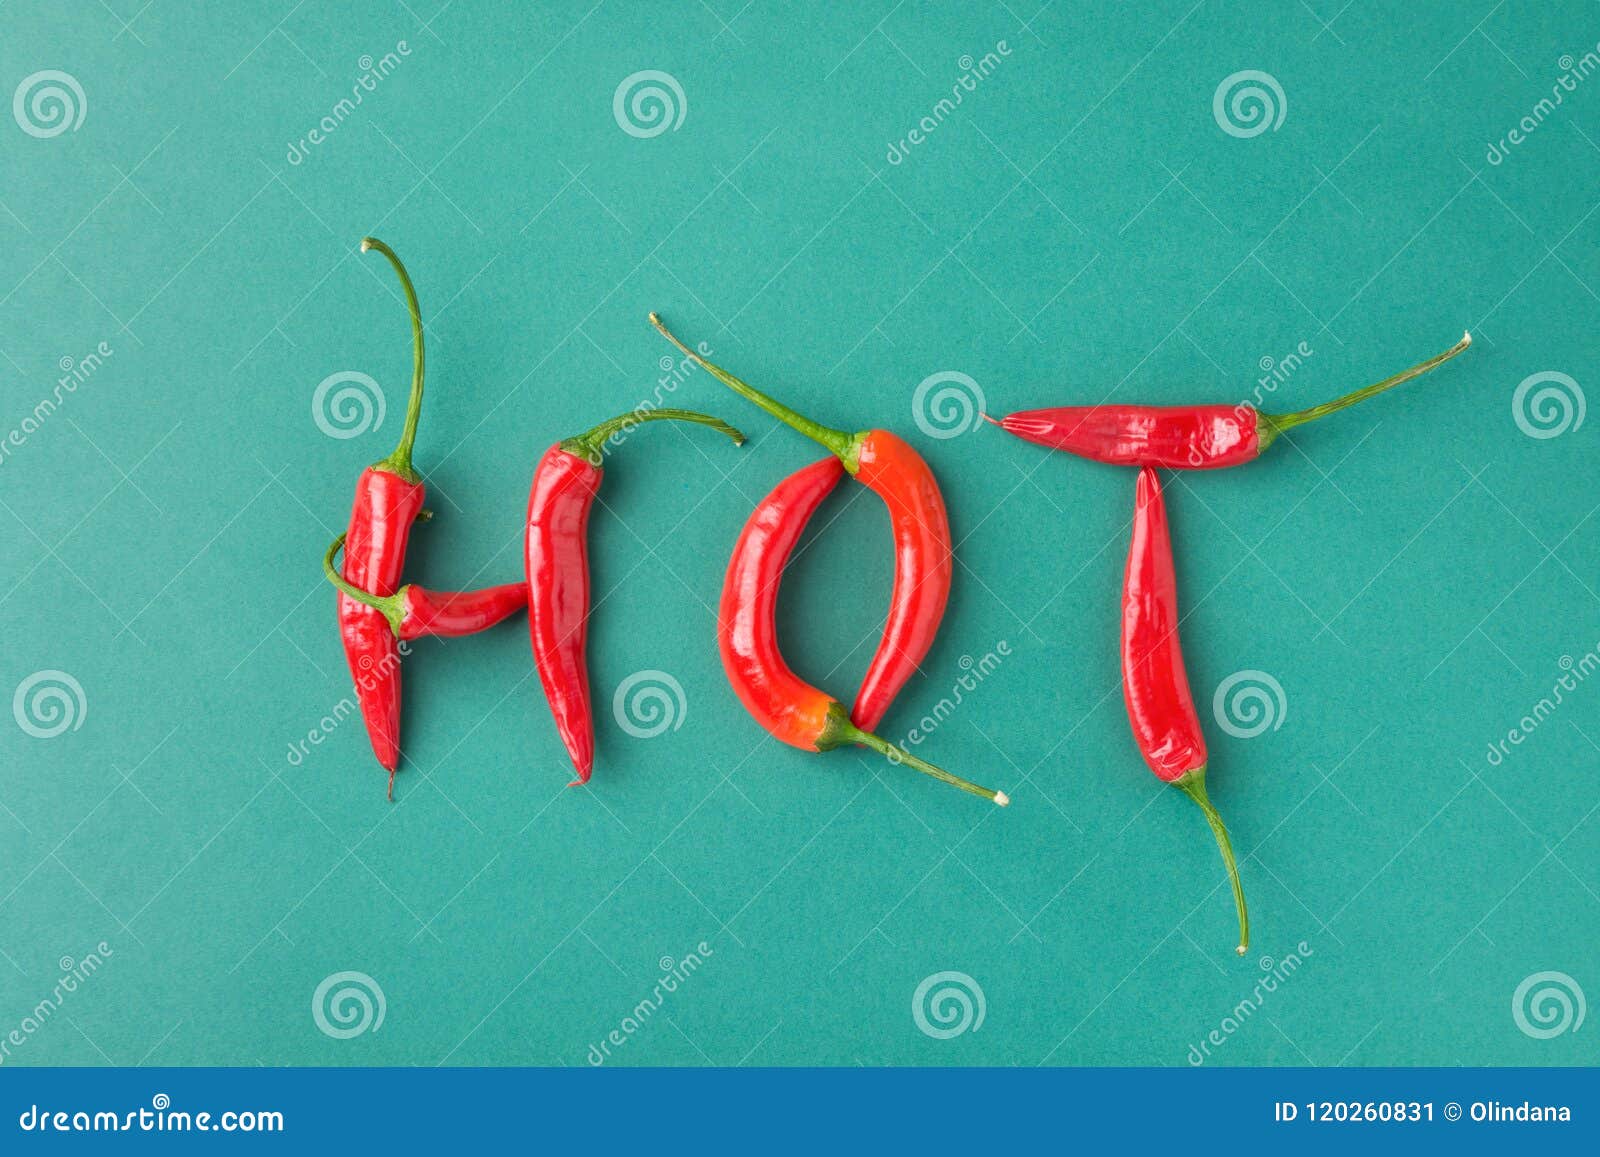 Food Lettering Typography Word Hot Made From Red Spicy Chili Peppers On Green Background Mexican Italian Spanish Greek Cuisine Stock Image Image Of Greek Brown 120260831